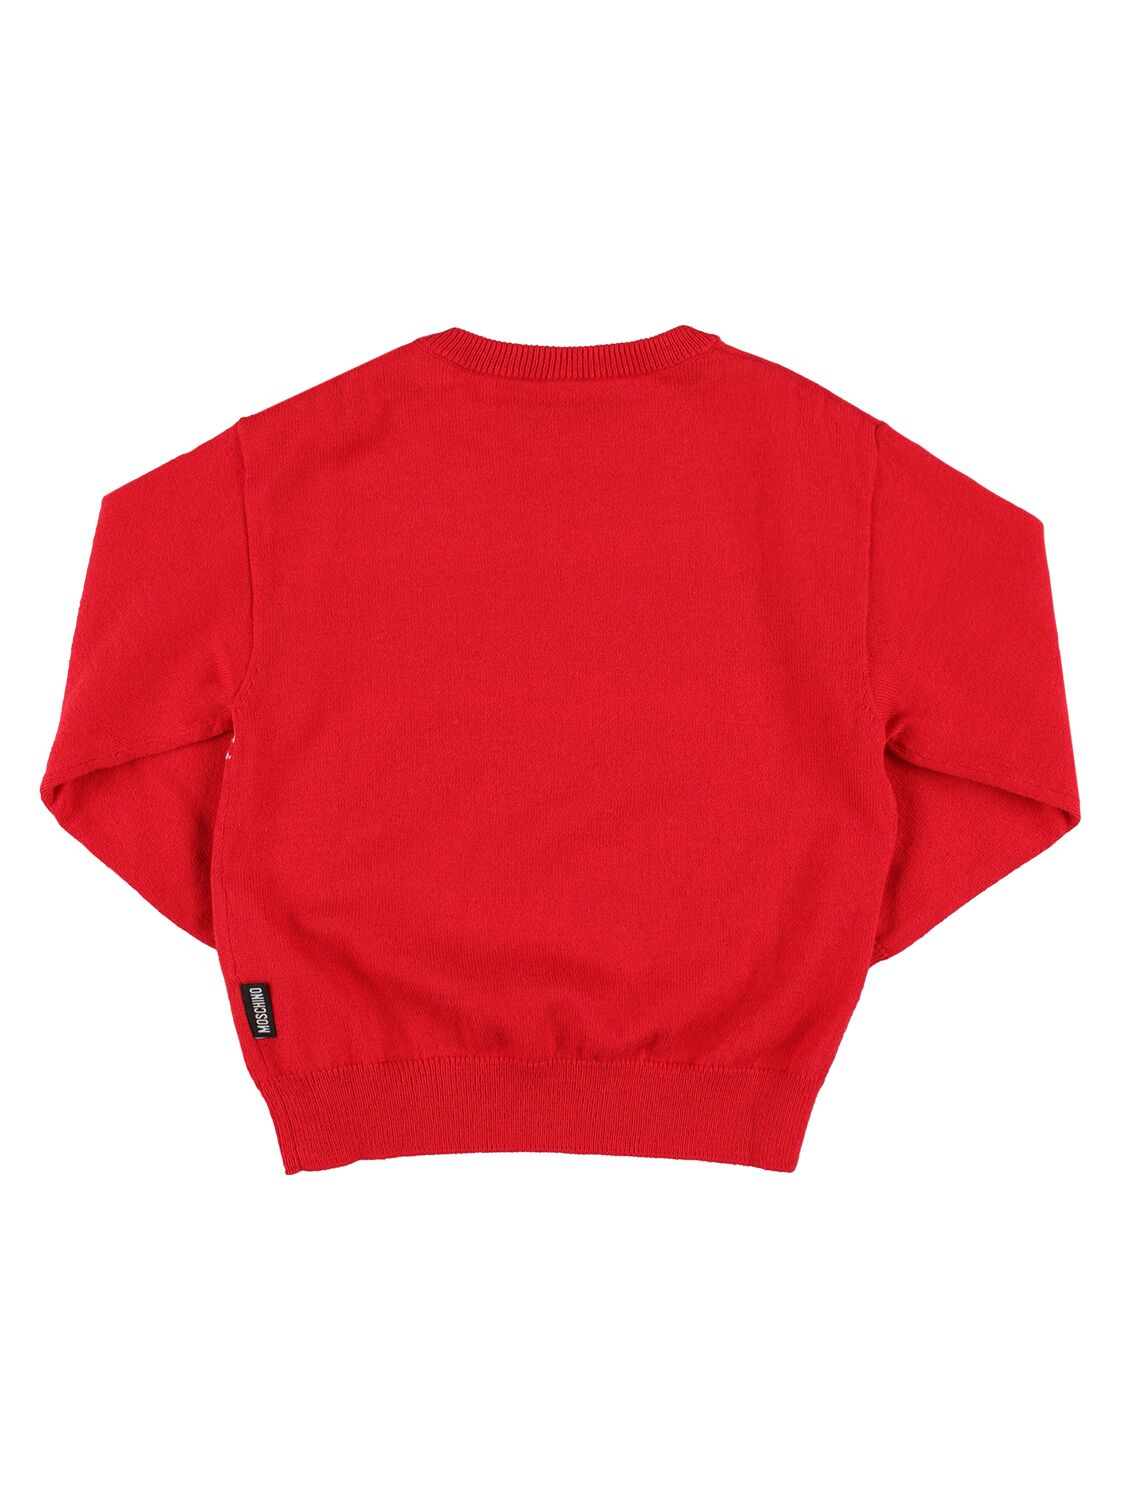 Shop Moschino Wool & Cotton Jacquard Knit Sweater In Red